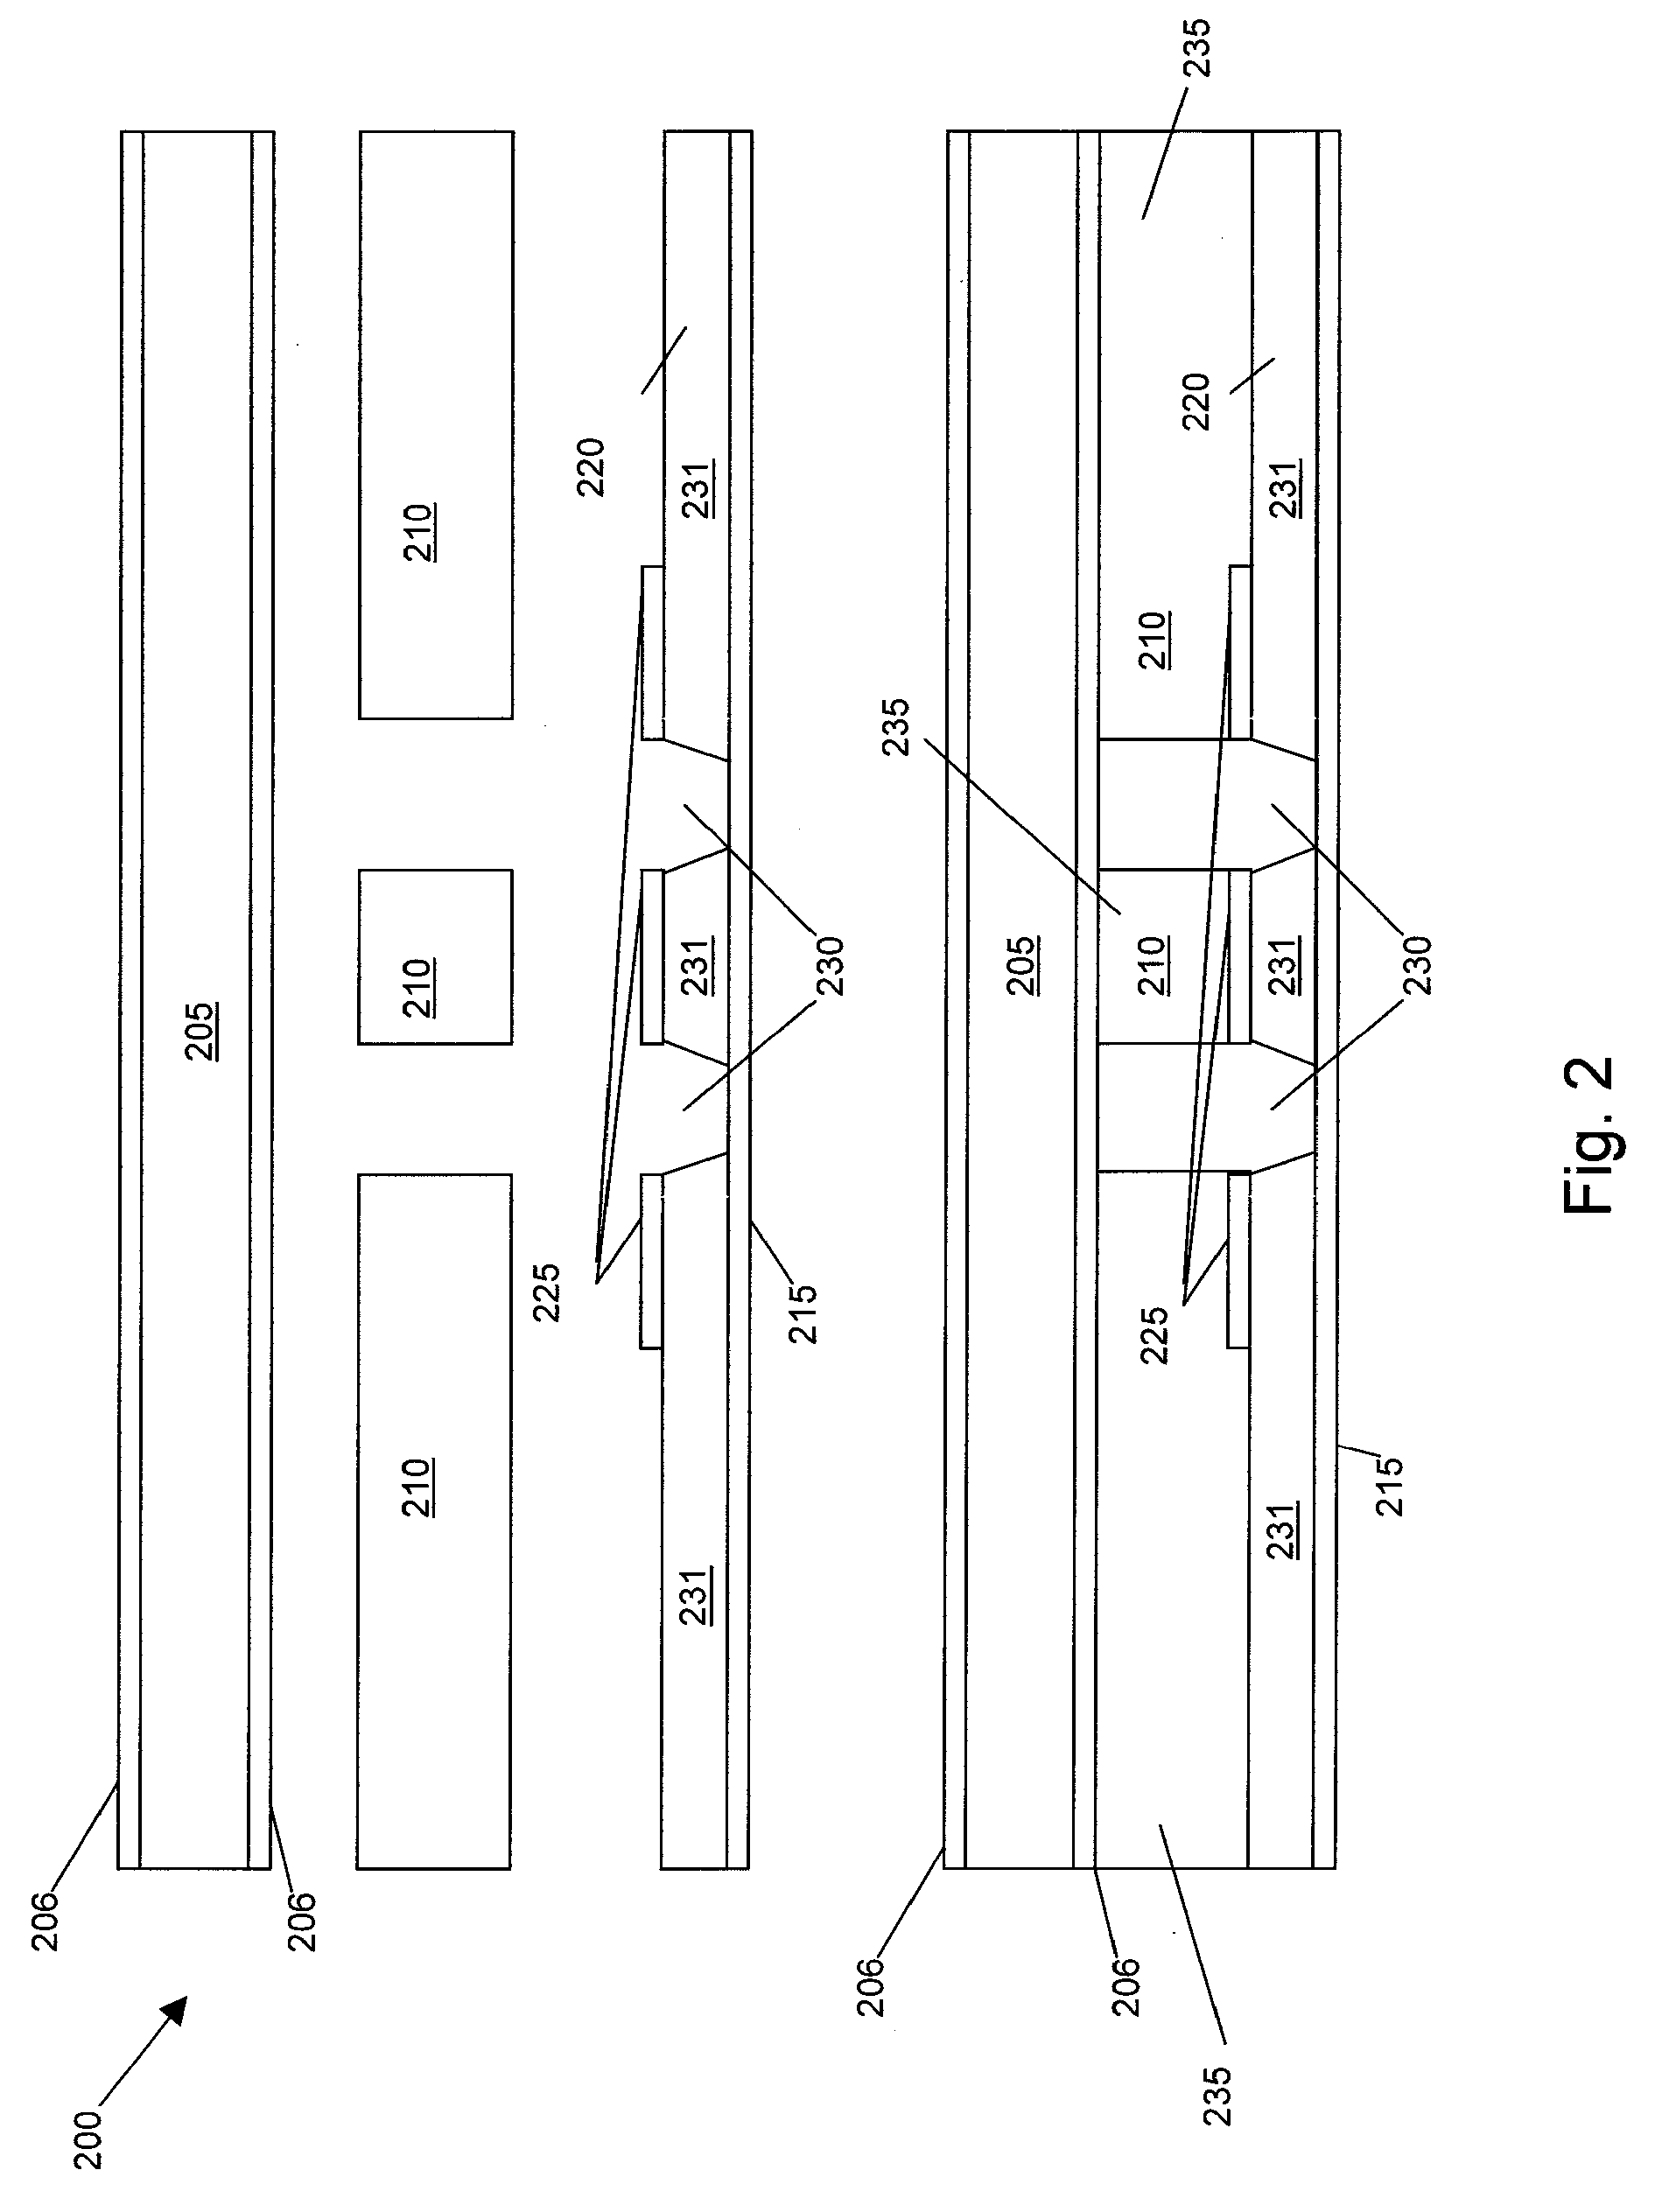 Method for reducing noise coupling in high speed digital systems